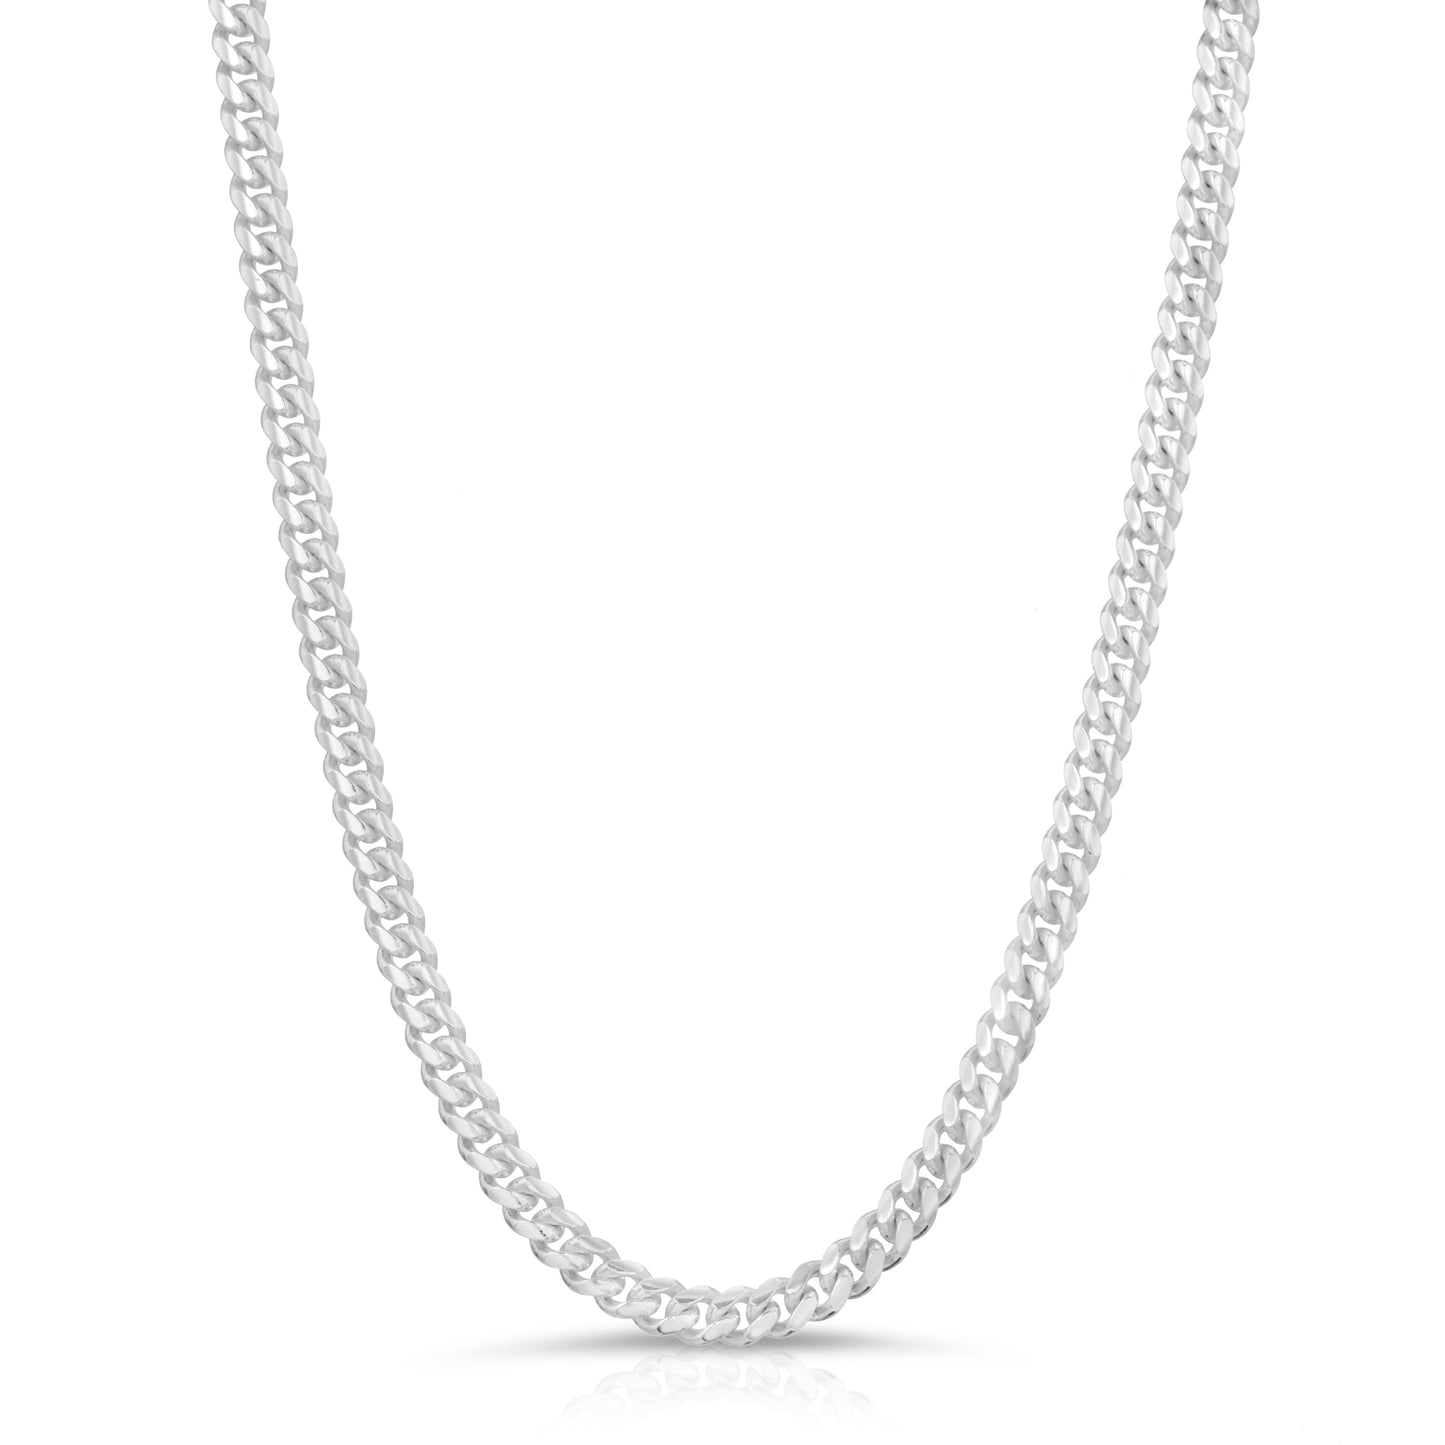 4mm Cuban Chain Sterling Silver - Luke Zion Jewelry 26 Inches